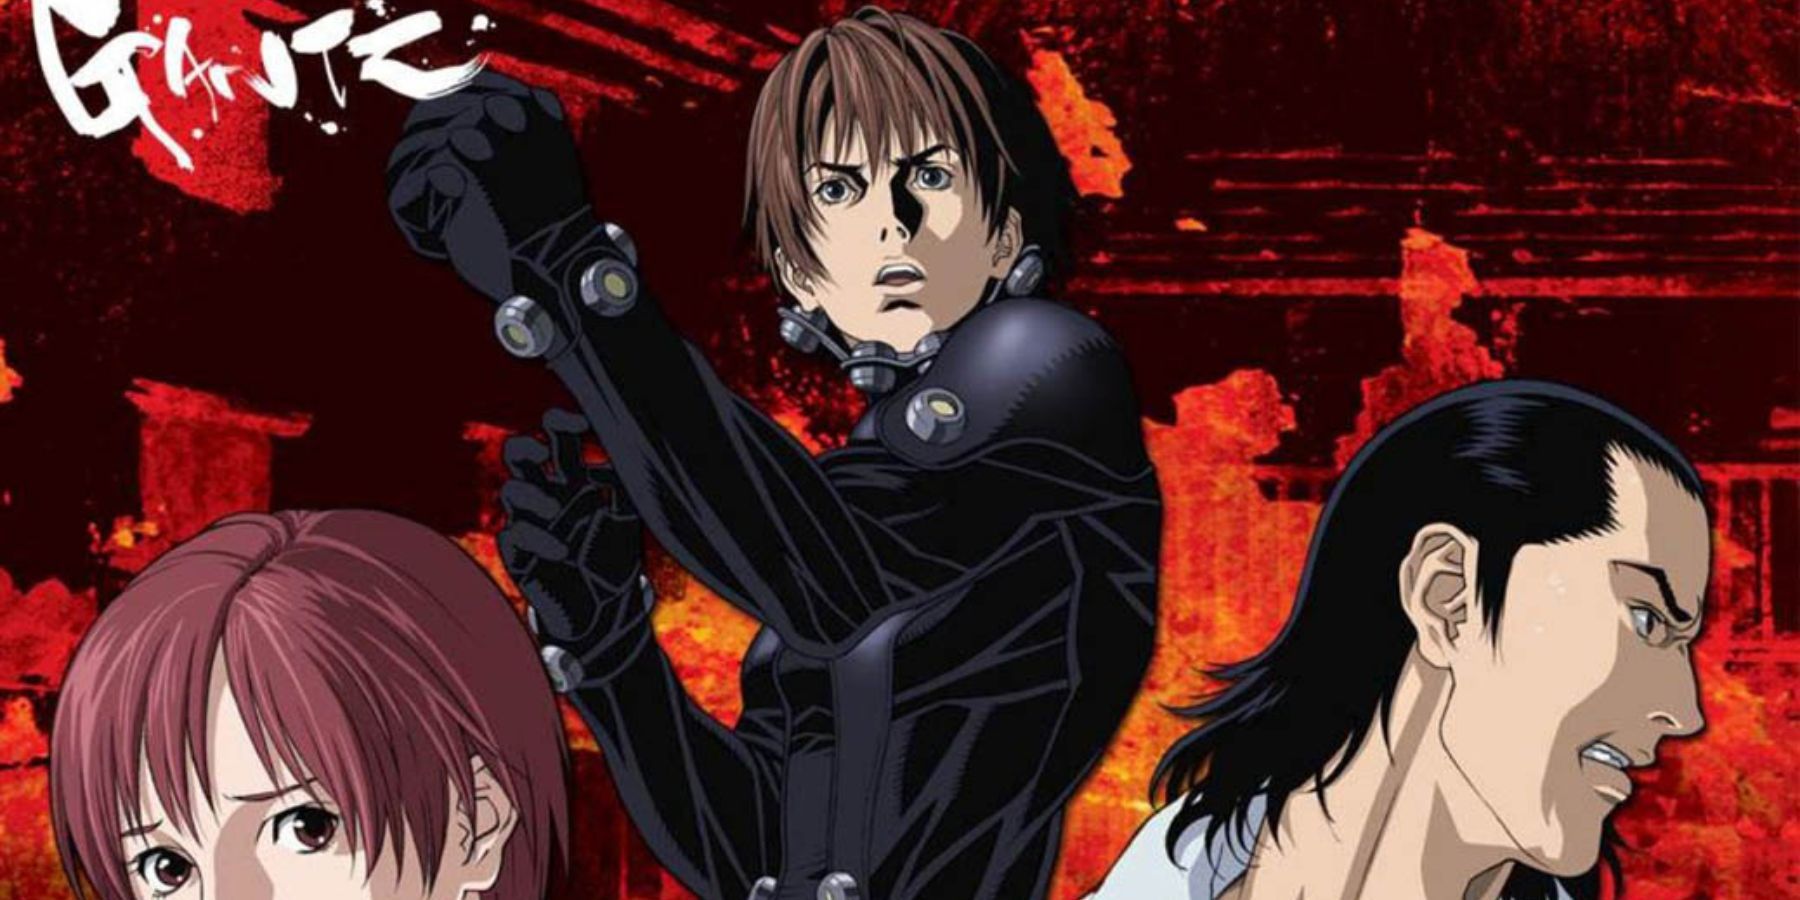 gantz-is-getting-a-live-action-adaptation-from-the-director-of-overlord-1